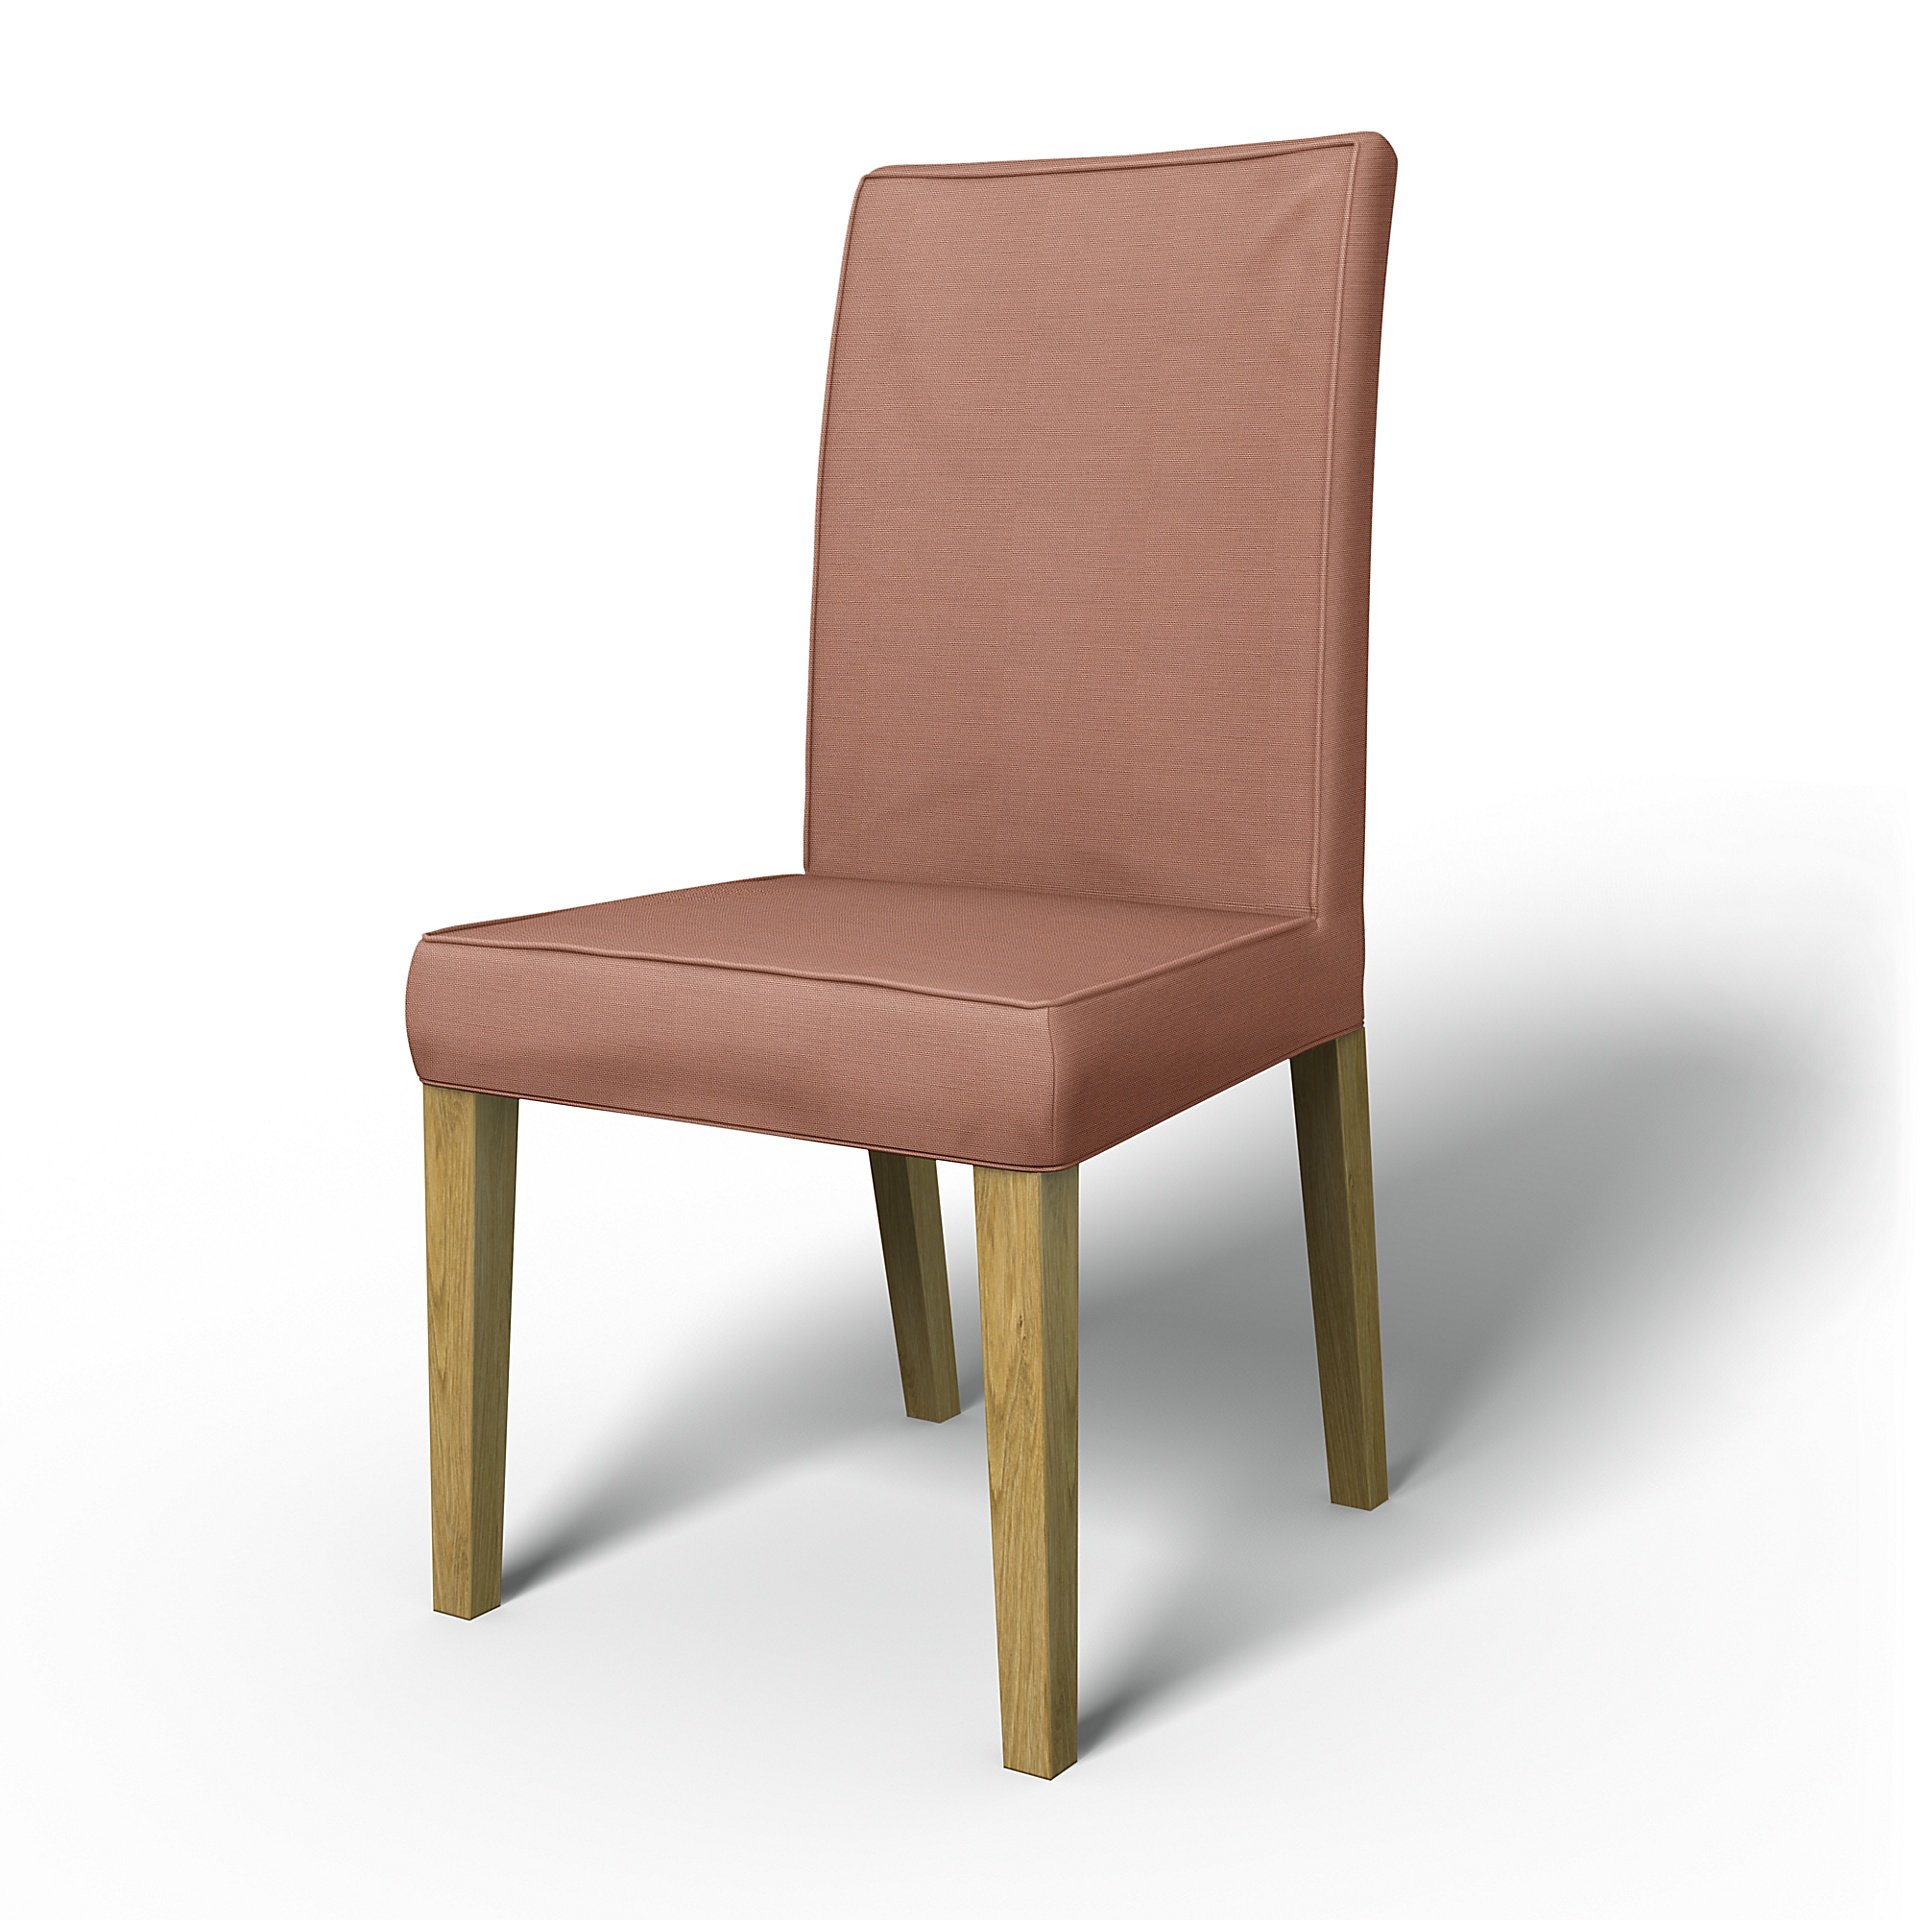 IKEA - Henriksdal Dining Chair Cover with piping (Standard model), Dusty Pink, Outdoor - Bemz